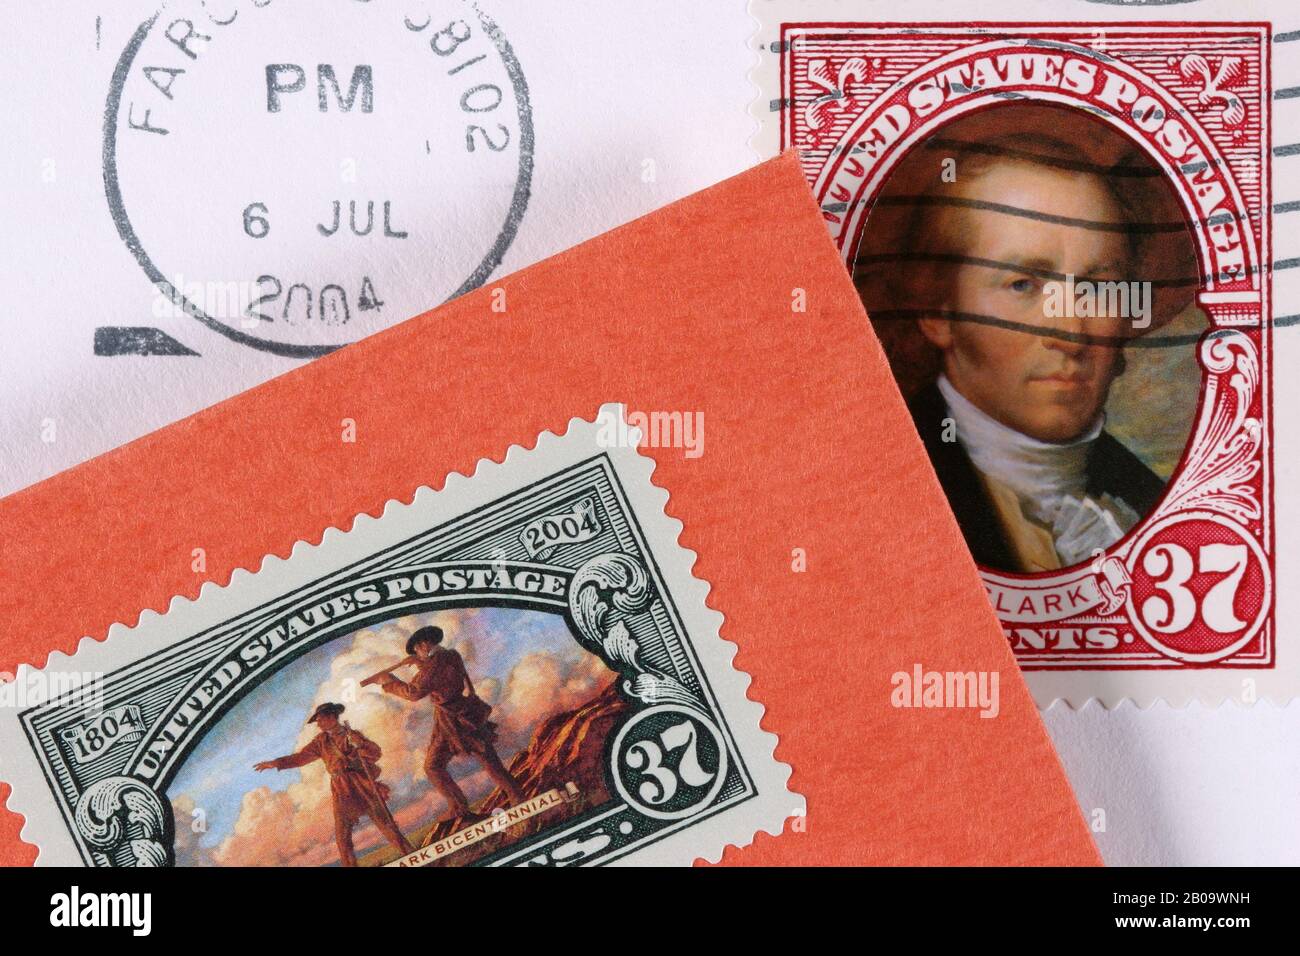 Collage of postal cancellations of stamps and an envelope for the 2004 bicentennial commemorating the Lewis and Clark Expedition of 1804-1806 Stock Photo